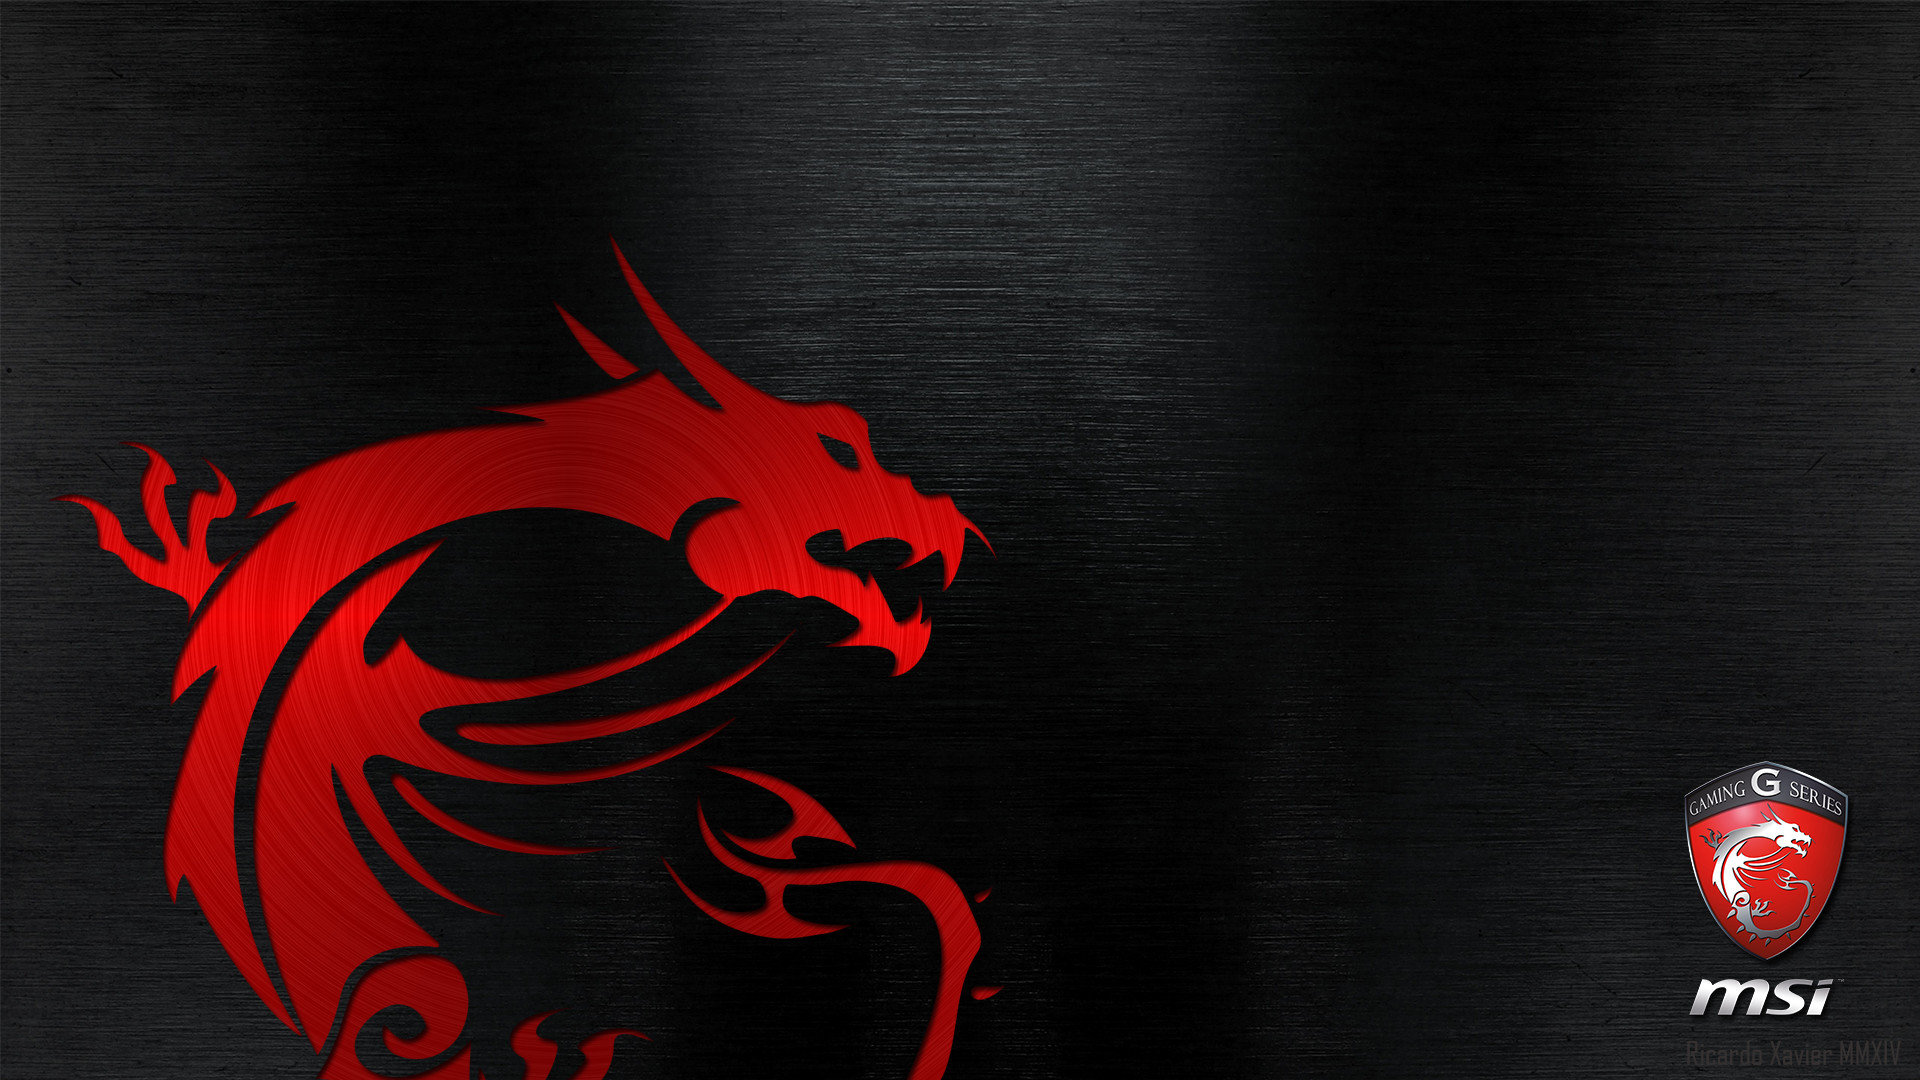 Msi Wallpapers Hd For Desktop Backgrounds